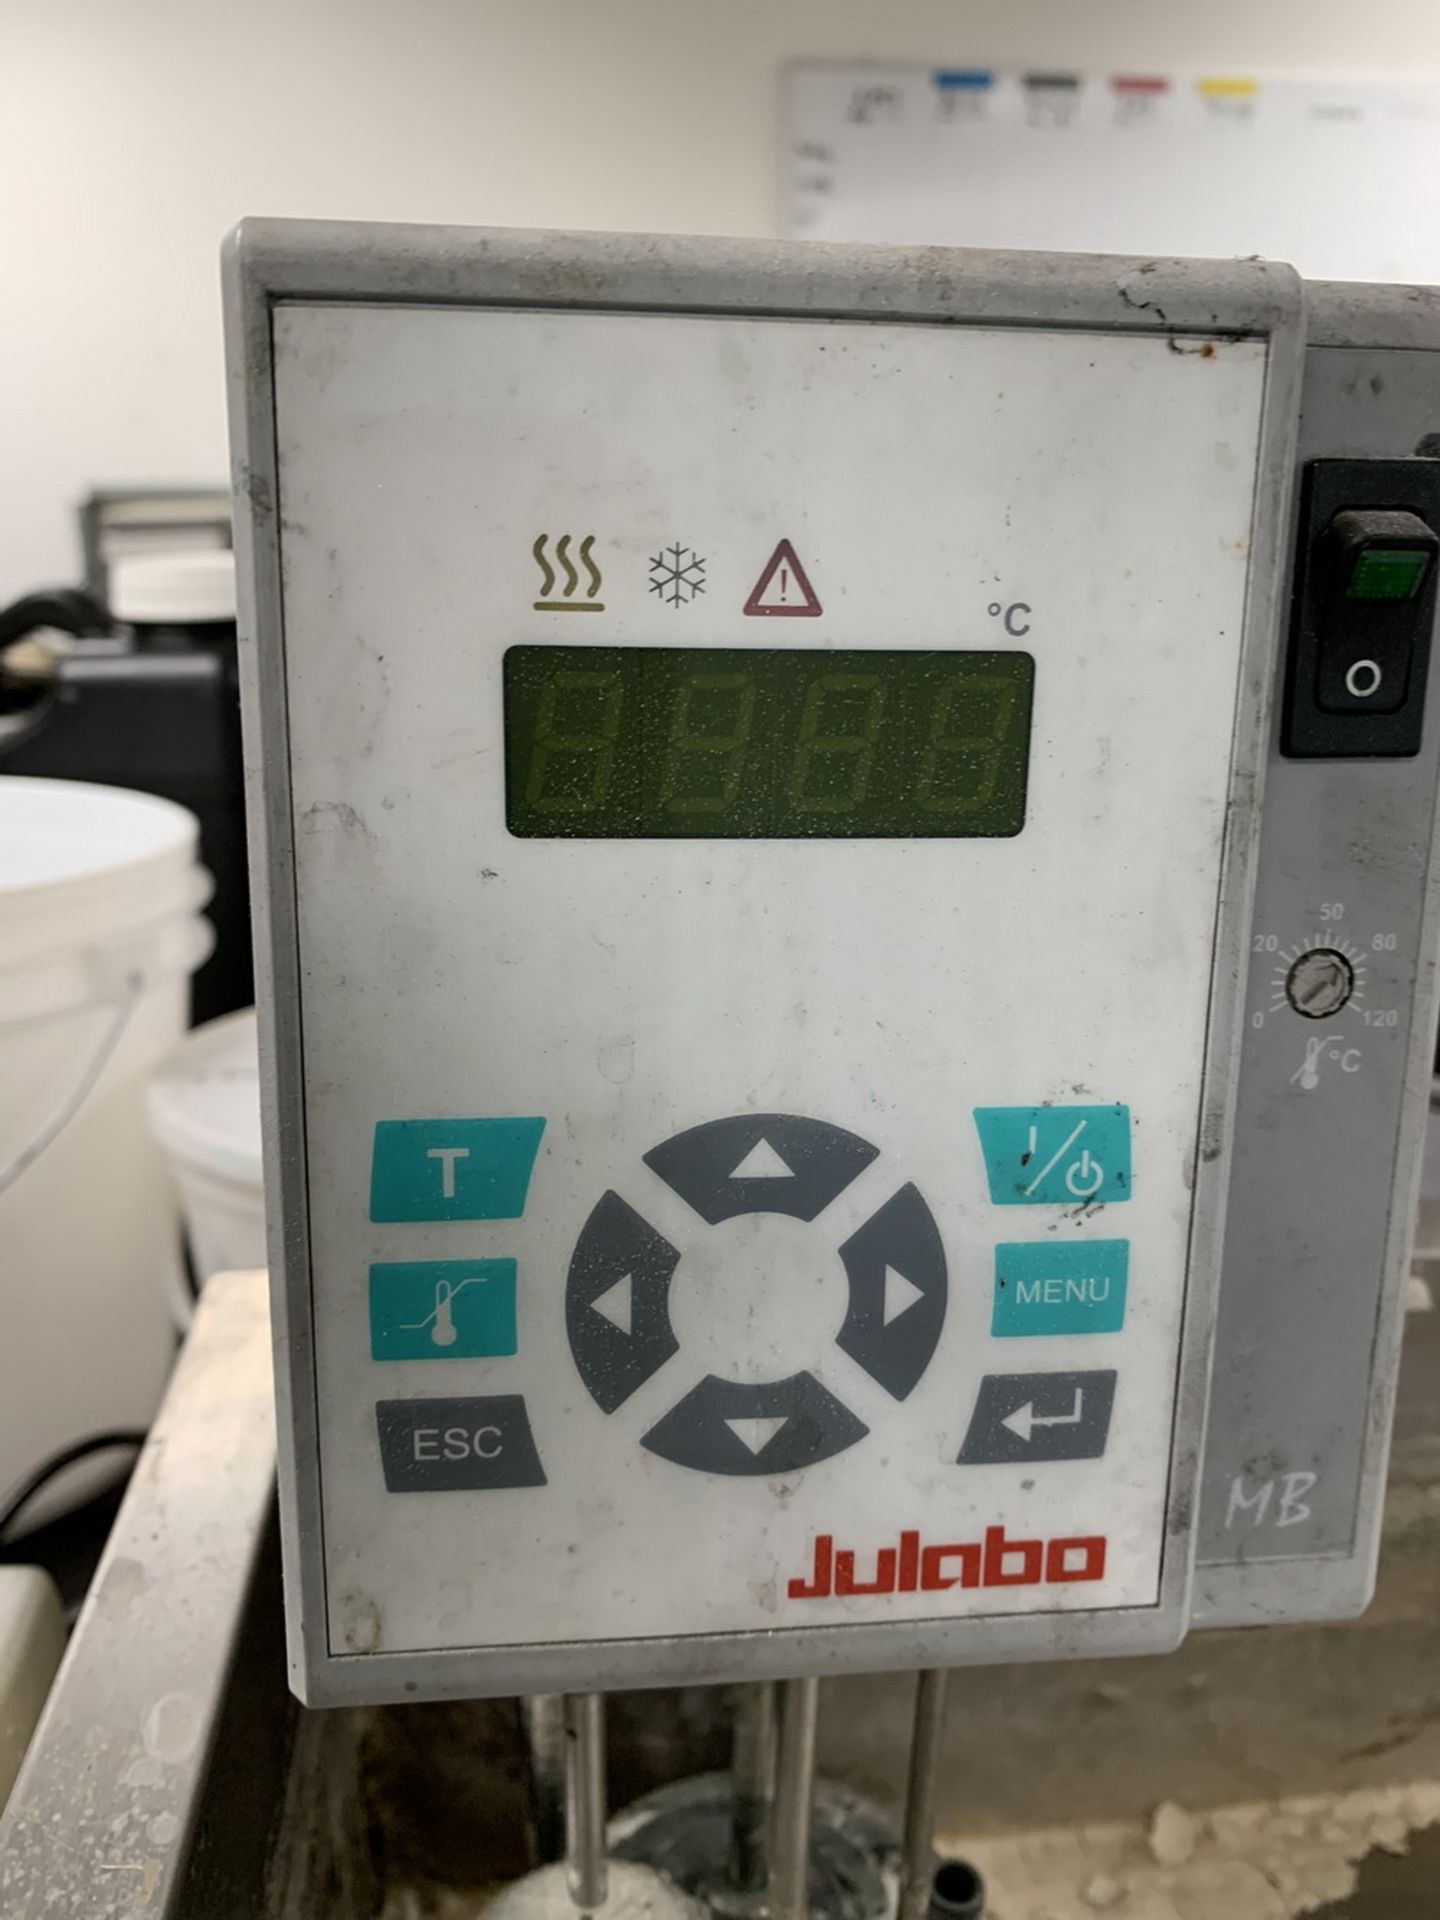 WATER BATH MODEL YB131, WITH JULABO TEMPERATURE CONTROLLER - Image 2 of 3